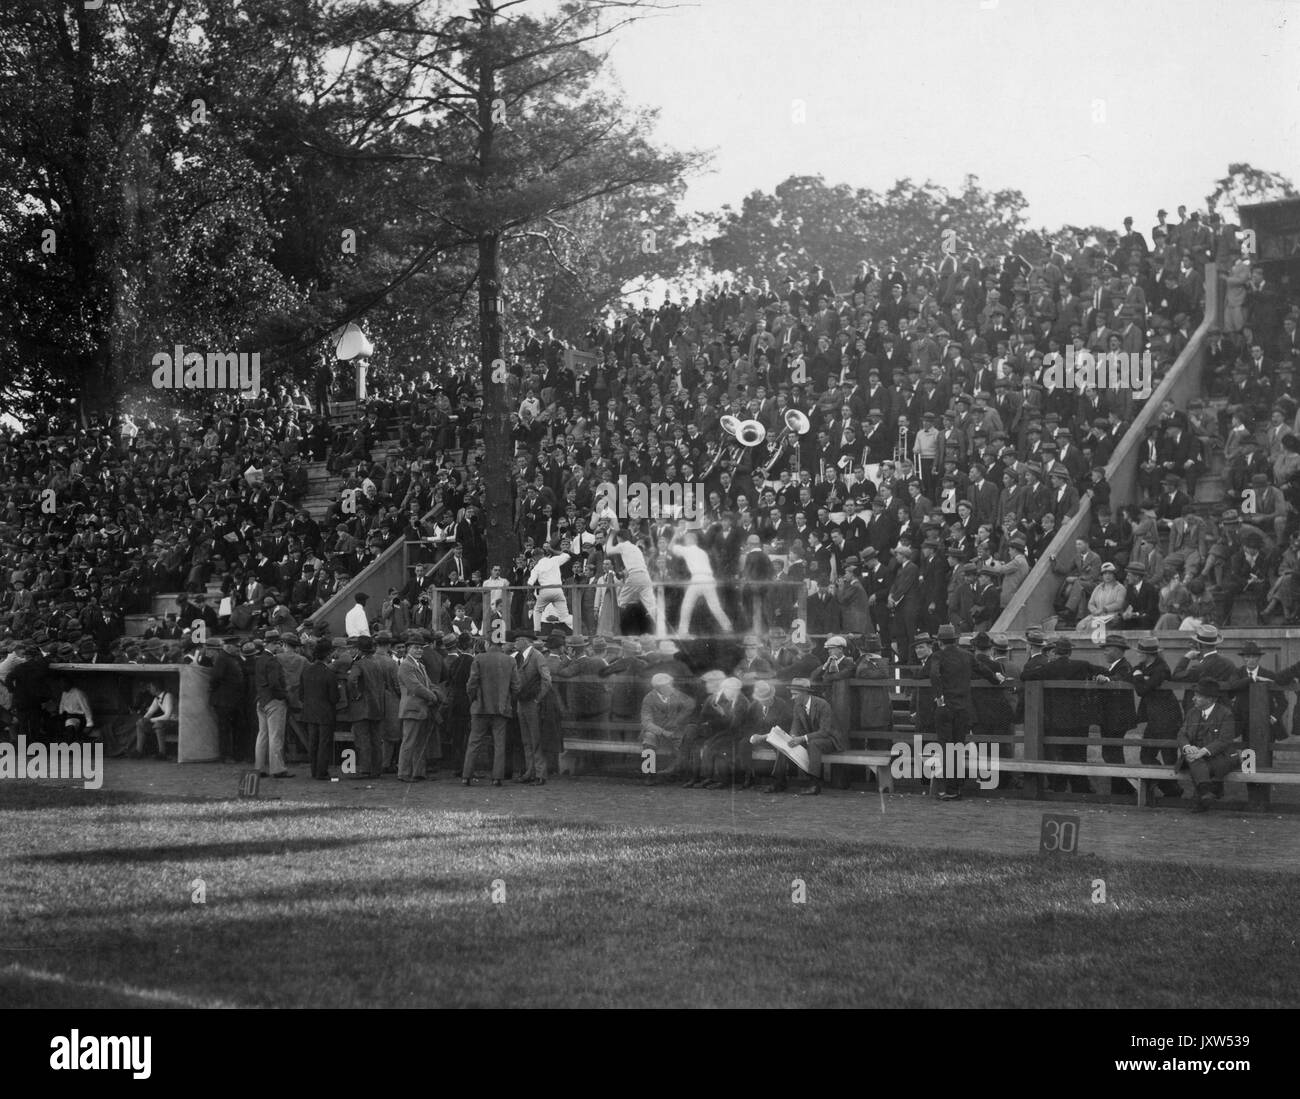 Band and cheerleaders entertaining a large crowd at a sporting event at Johns Hopkins University, 1930. Stock Photo